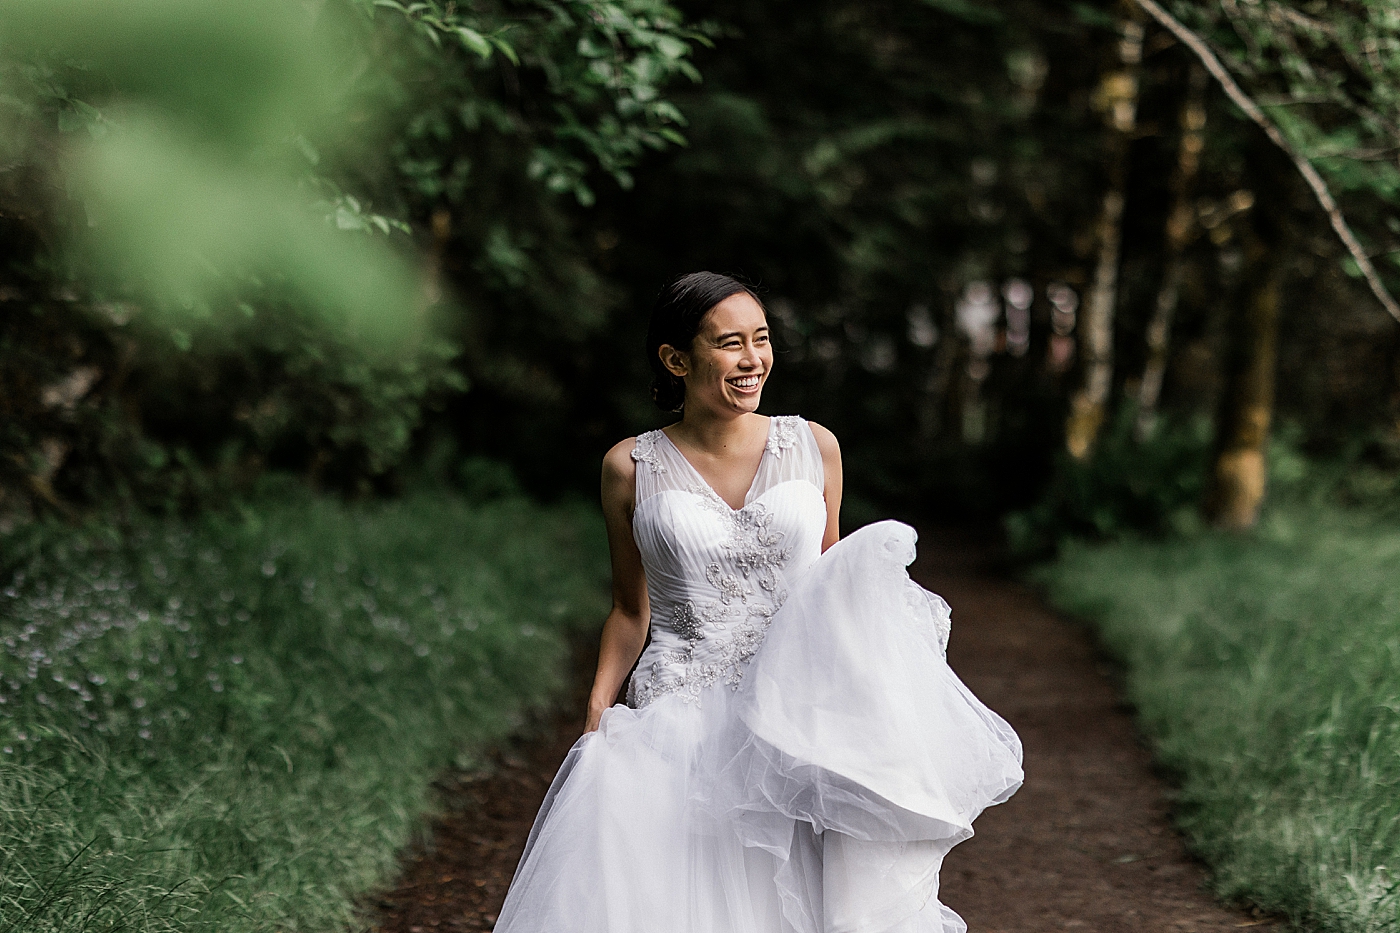 Bridal portraits at Lake Crescent in the Olympic National Park | Megan Montalvo Photography